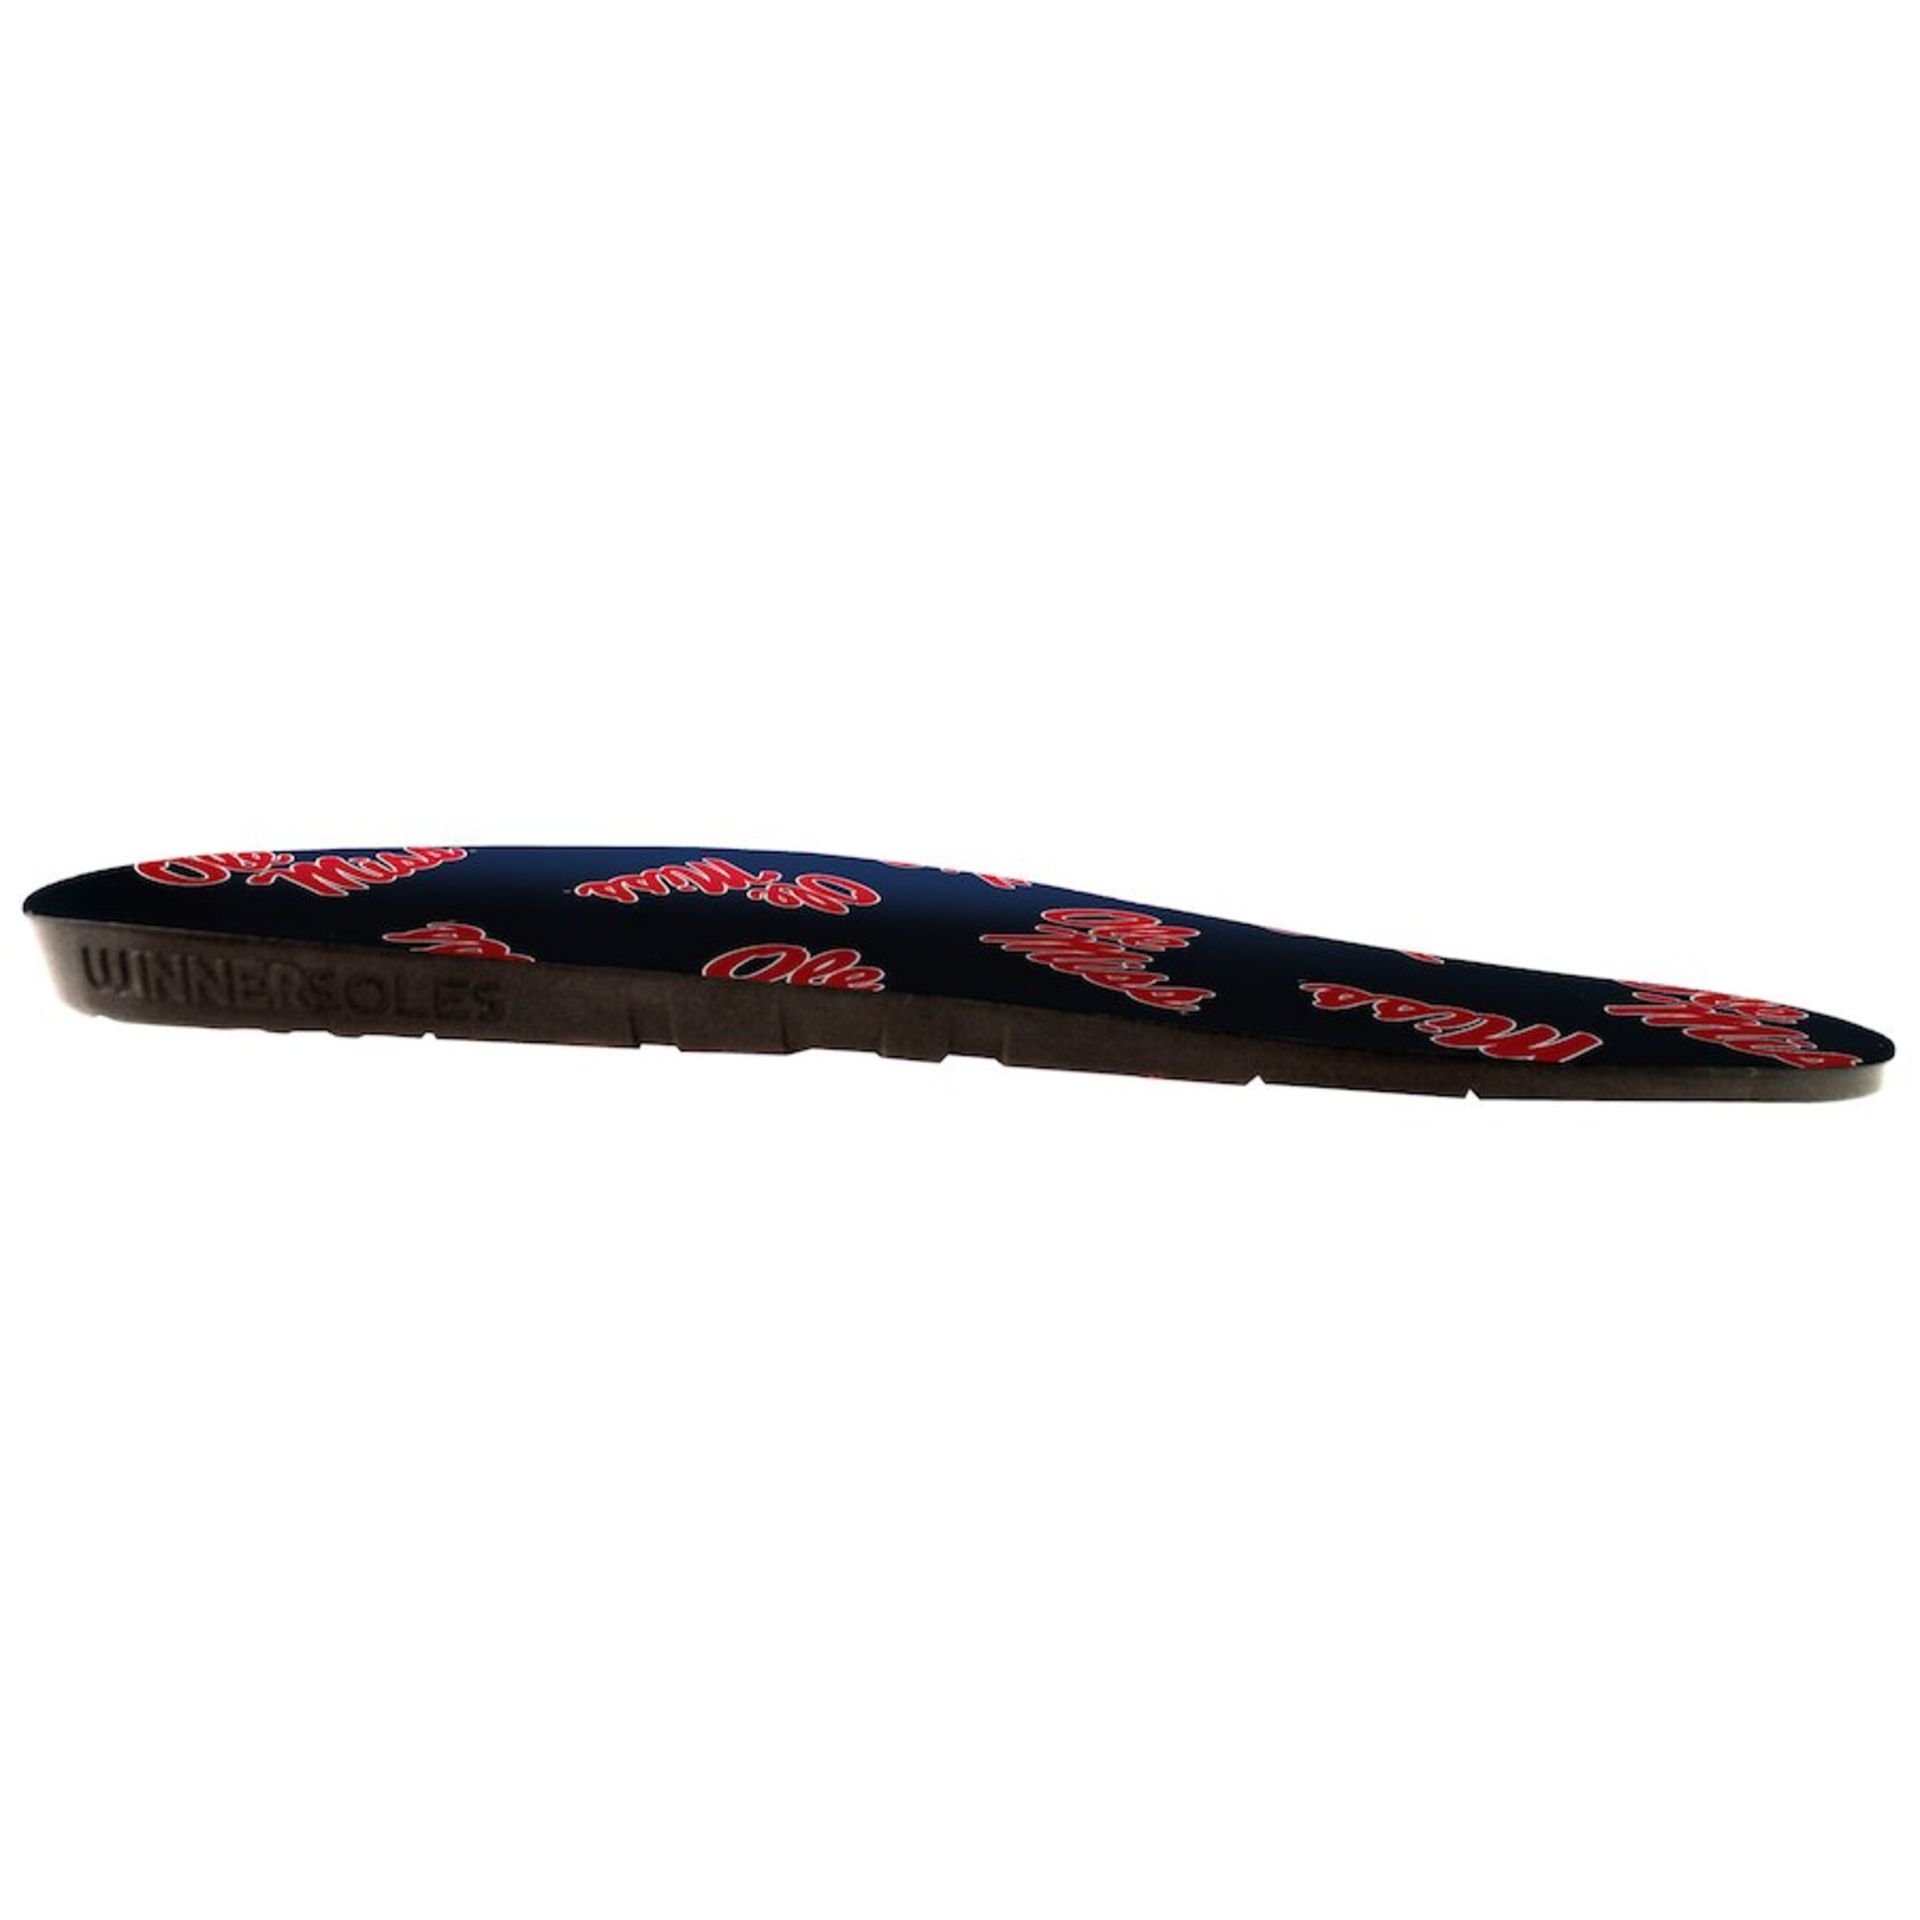 696 X Ole Miss Rebels Supreme Insole - Navy - Image 2 of 2